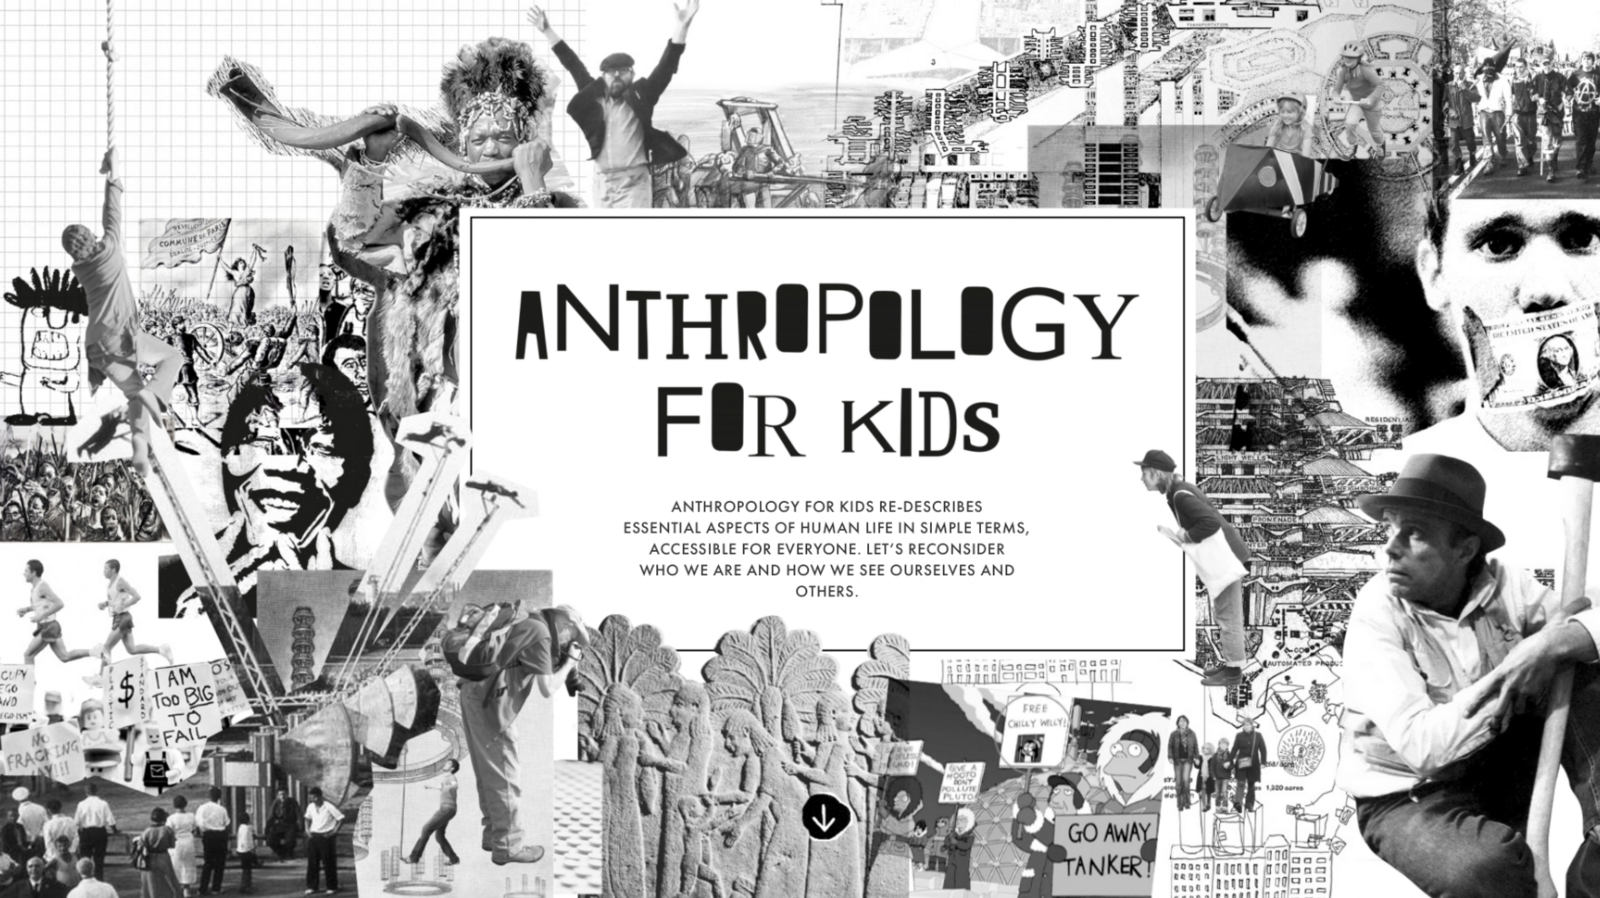 Cover picture in b/w with caption "Anthropology for Kids".